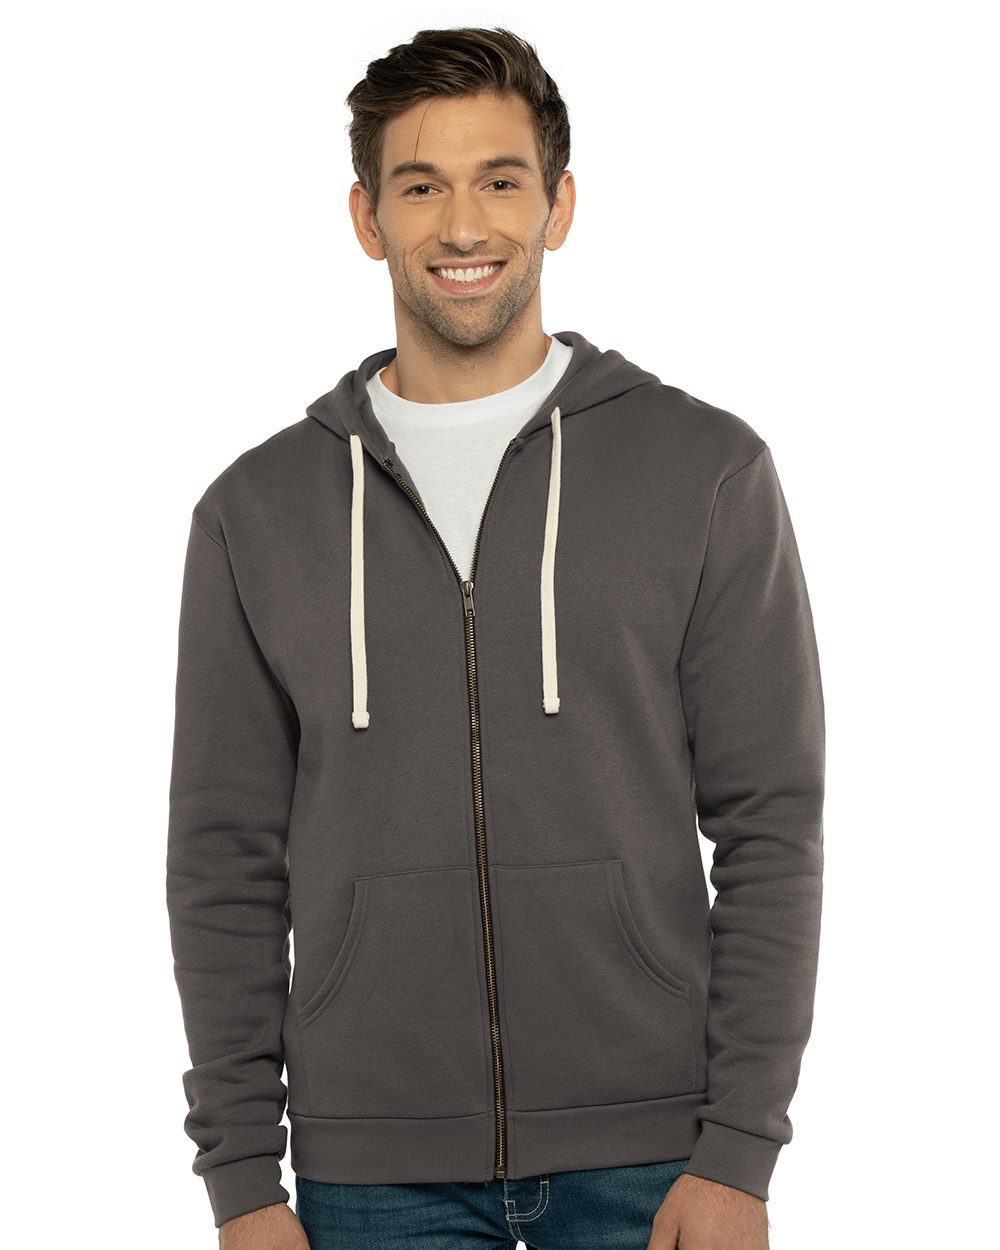 Next Level - Santa Cruz Hoodie for Men | 7.4 oz./yd², 80/20  cotton/polyester, 100% cotton face | Wrap Yourself in Cozy Style Hoodie -  Unmatched